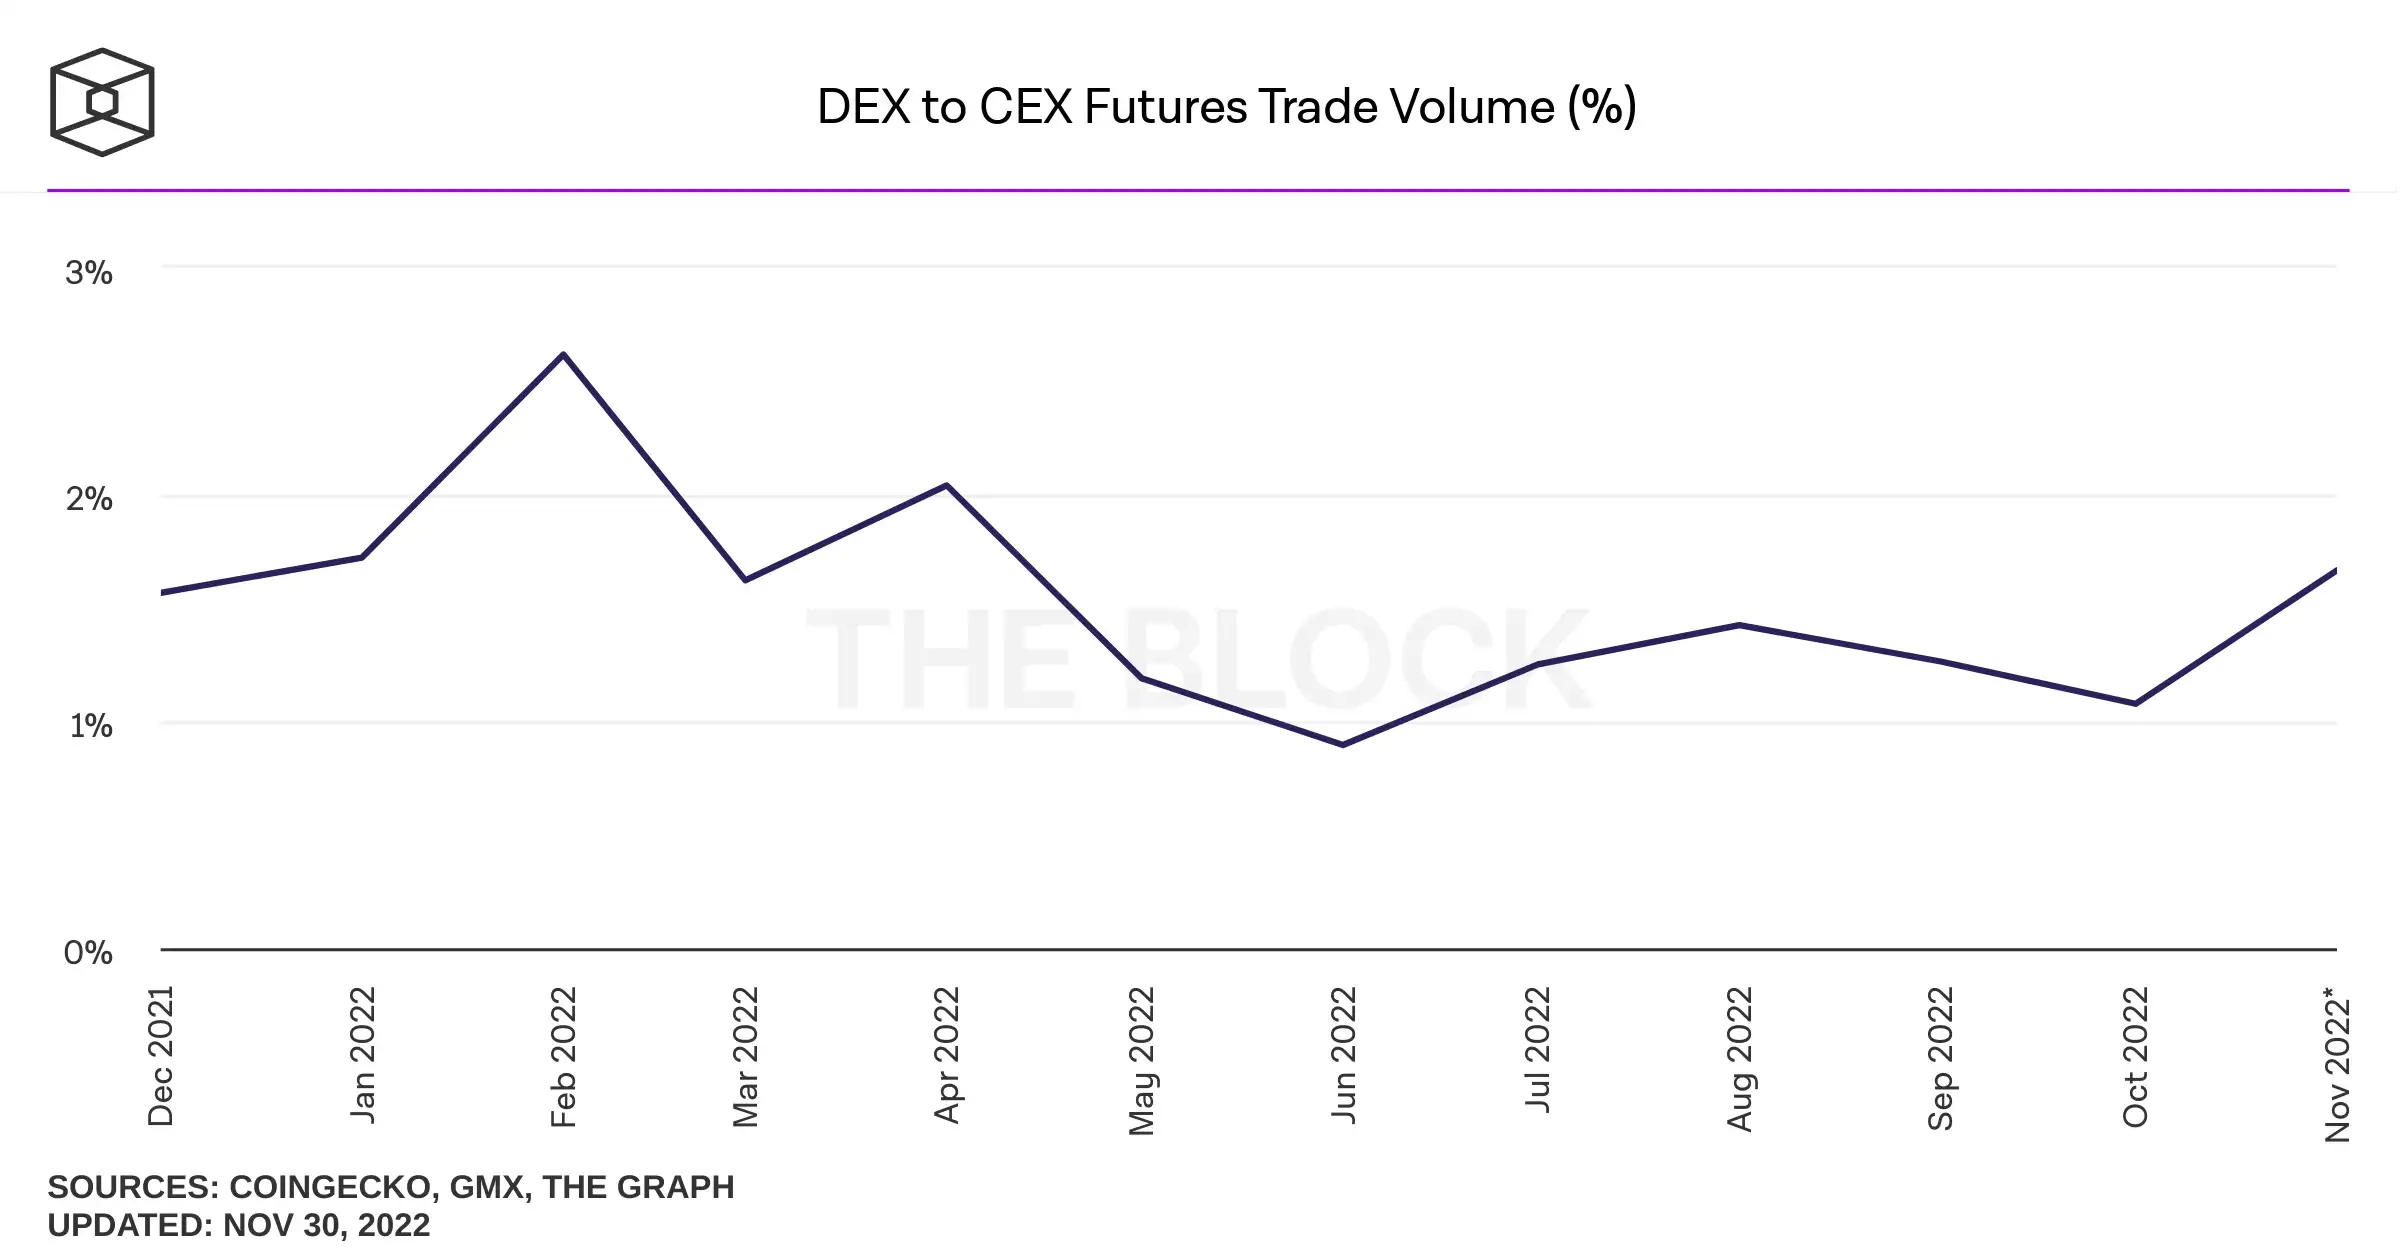 Fig. 2. DEX to CEX Futures Trade Volume (Source: The Block)